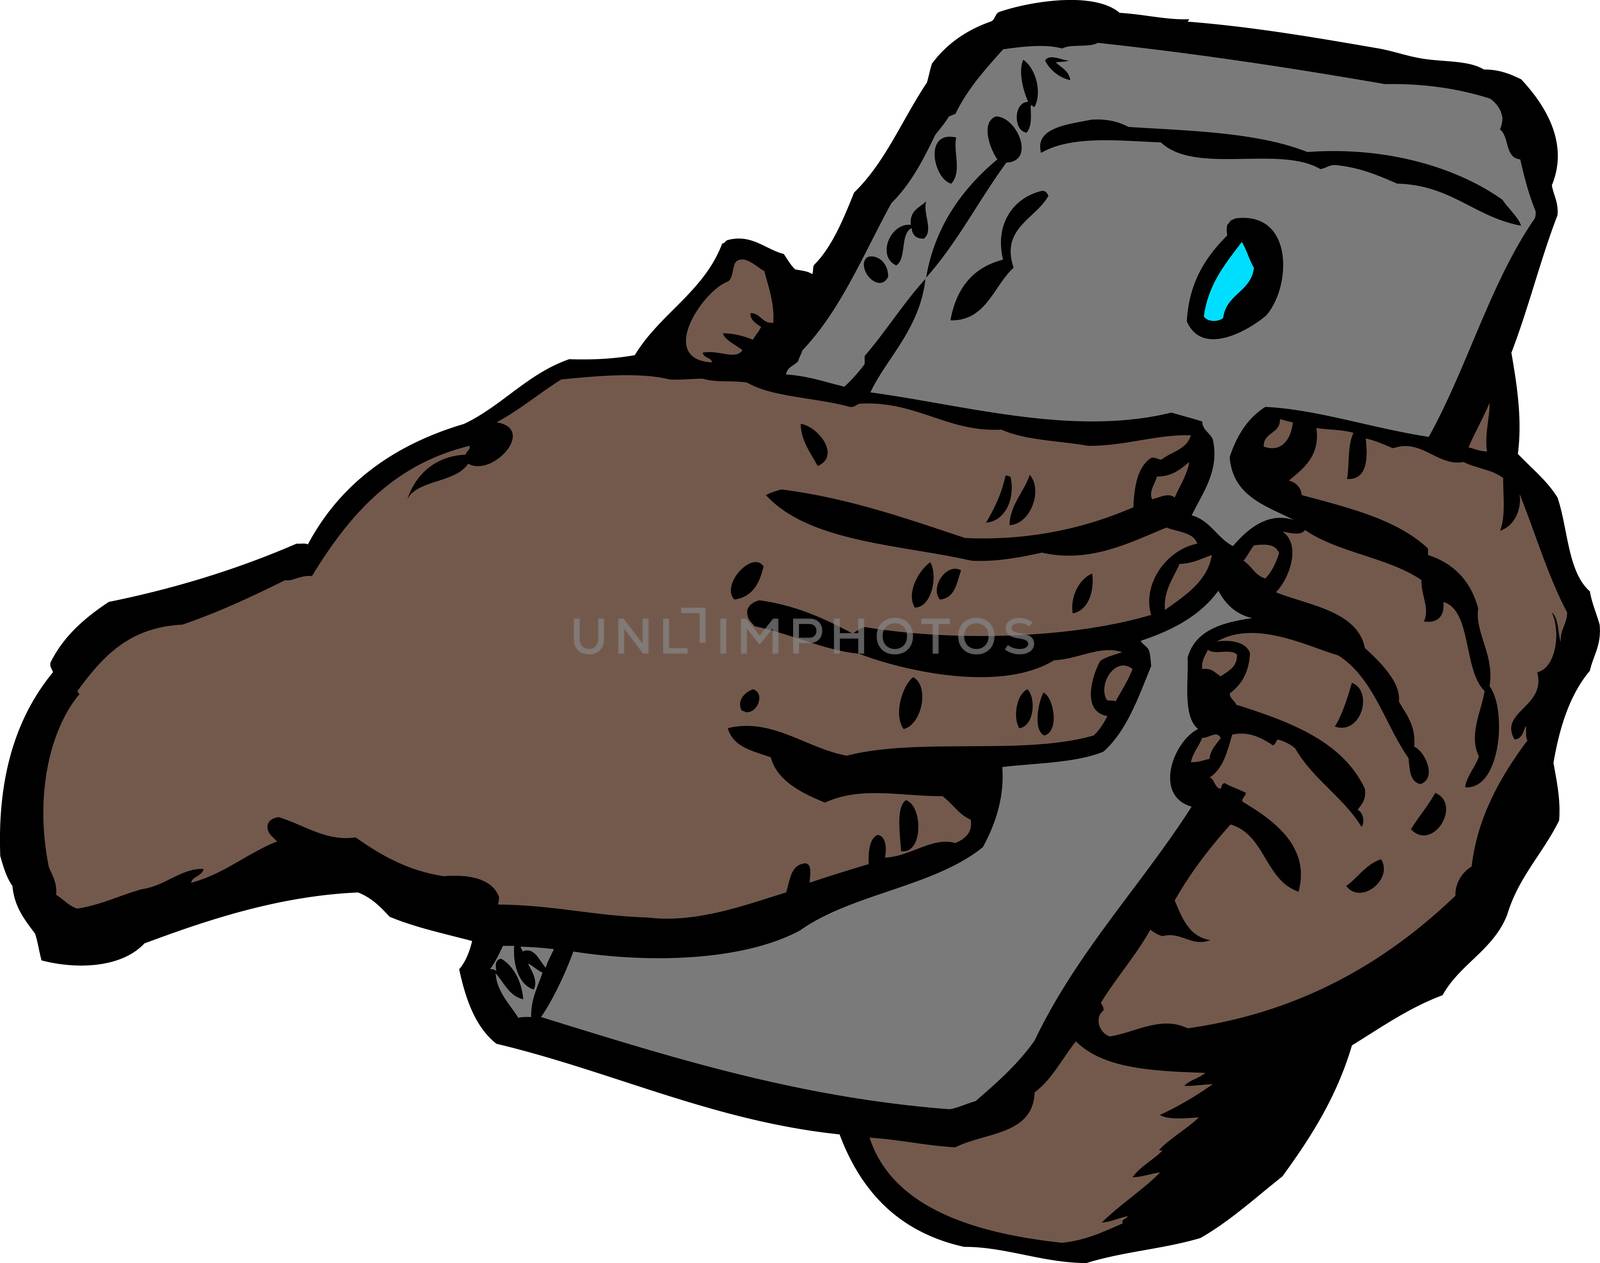 Hands text messaging on phone by TheBlackRhino